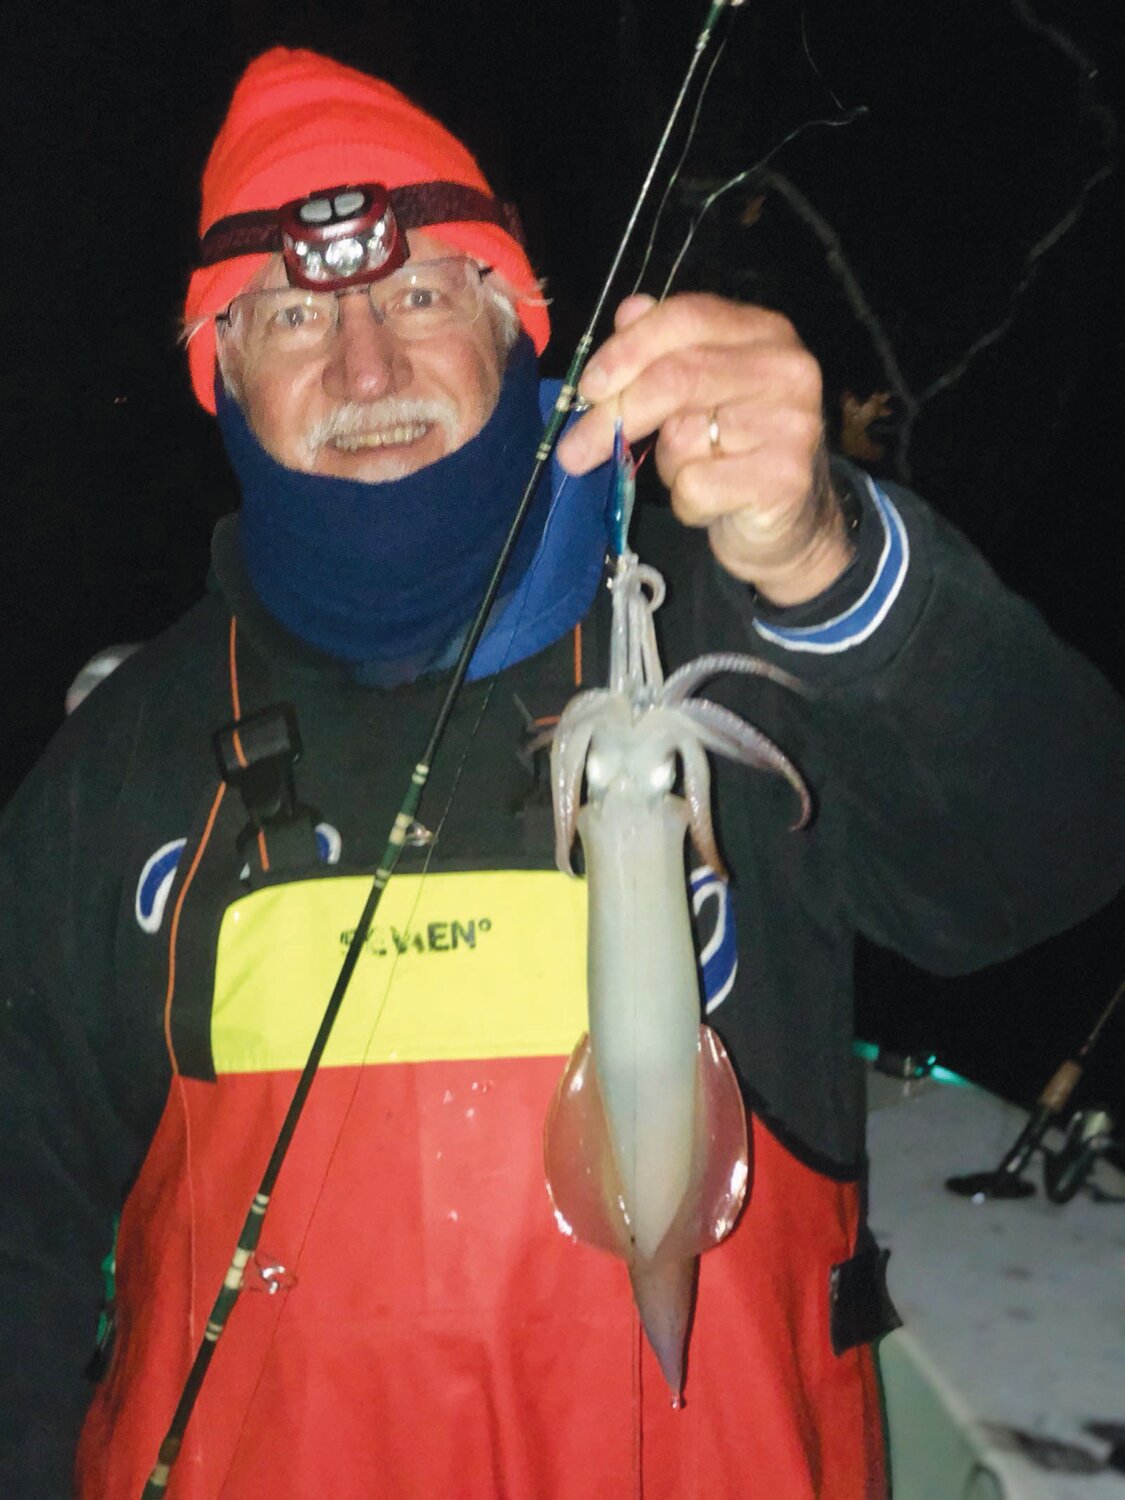 THE SQUID ARE IN: Phil Duckett Jr. of Portsmouth with a squid he caught Friday night fishing the Newport Bridge area with squid fishing expert Greg Vespe of Tiverton.